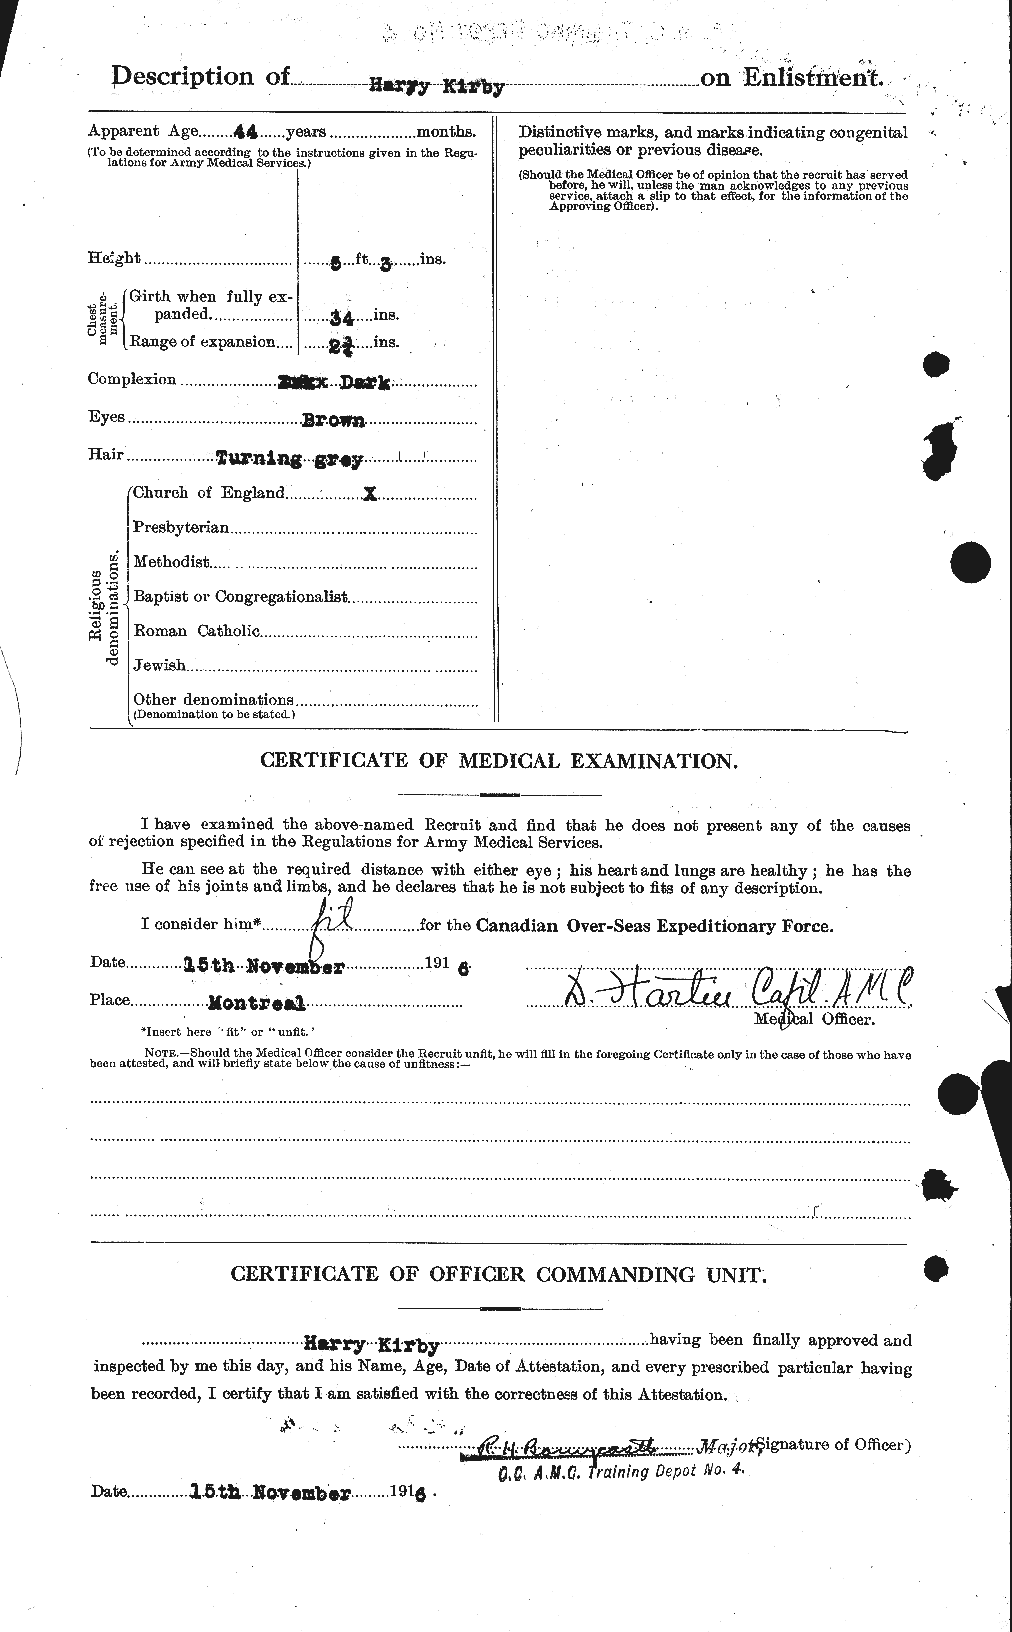 Personnel Records of the First World War - CEF 437209b